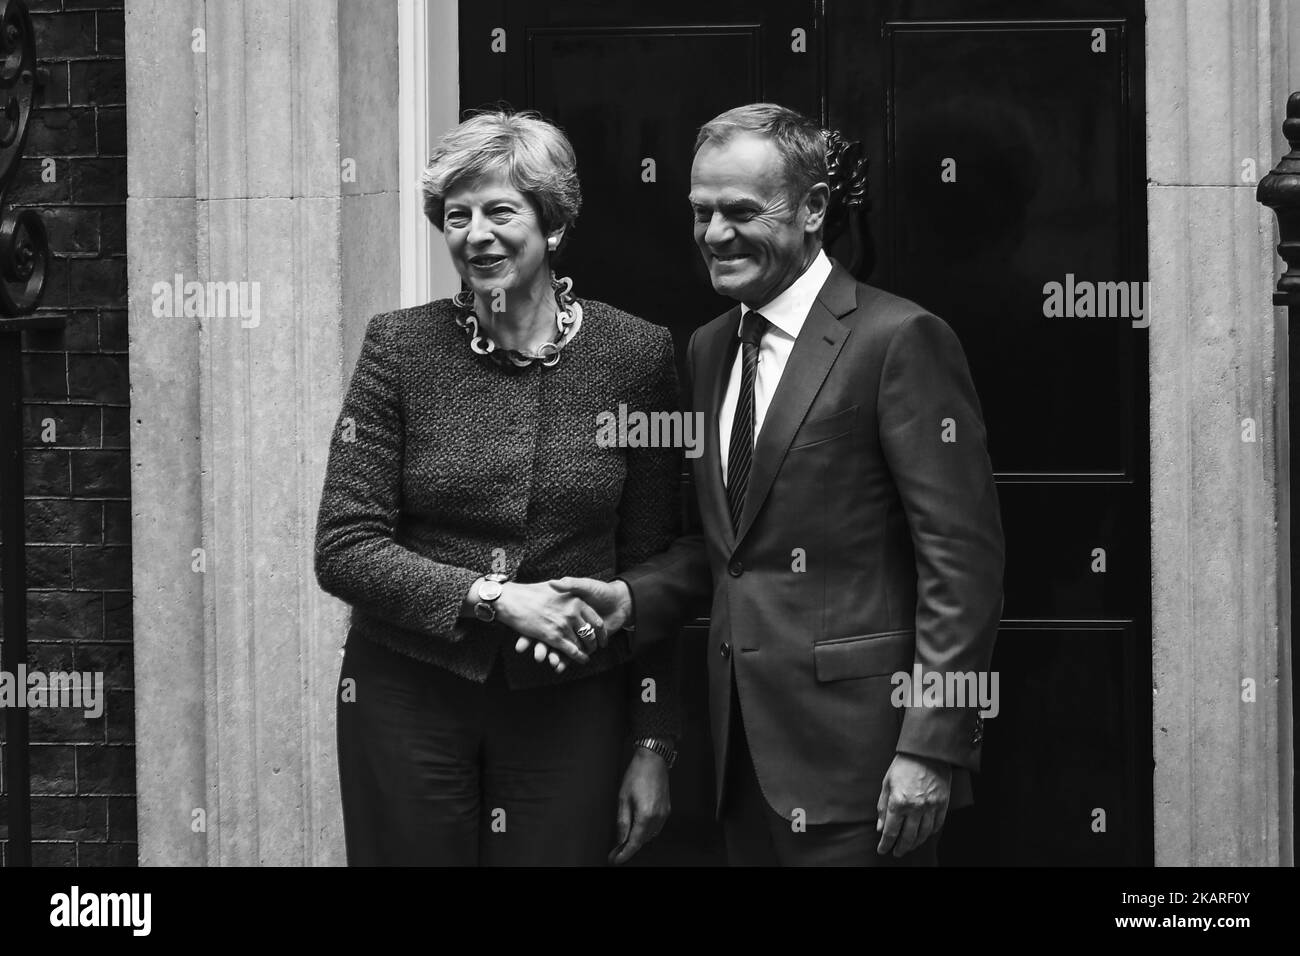 British Prime Minister Theresa May (L) greets President of the European Council, Donald Tusk in Downing Street, London on September 26, 2017. Theresa May welcomed the President of the European Council, Donald Tusk, to Downing Street for the first time since she set out plans for a two-year transition period post-Brexit. (Photo by Alberto Pezzali/NurPhoto) Stock Photo